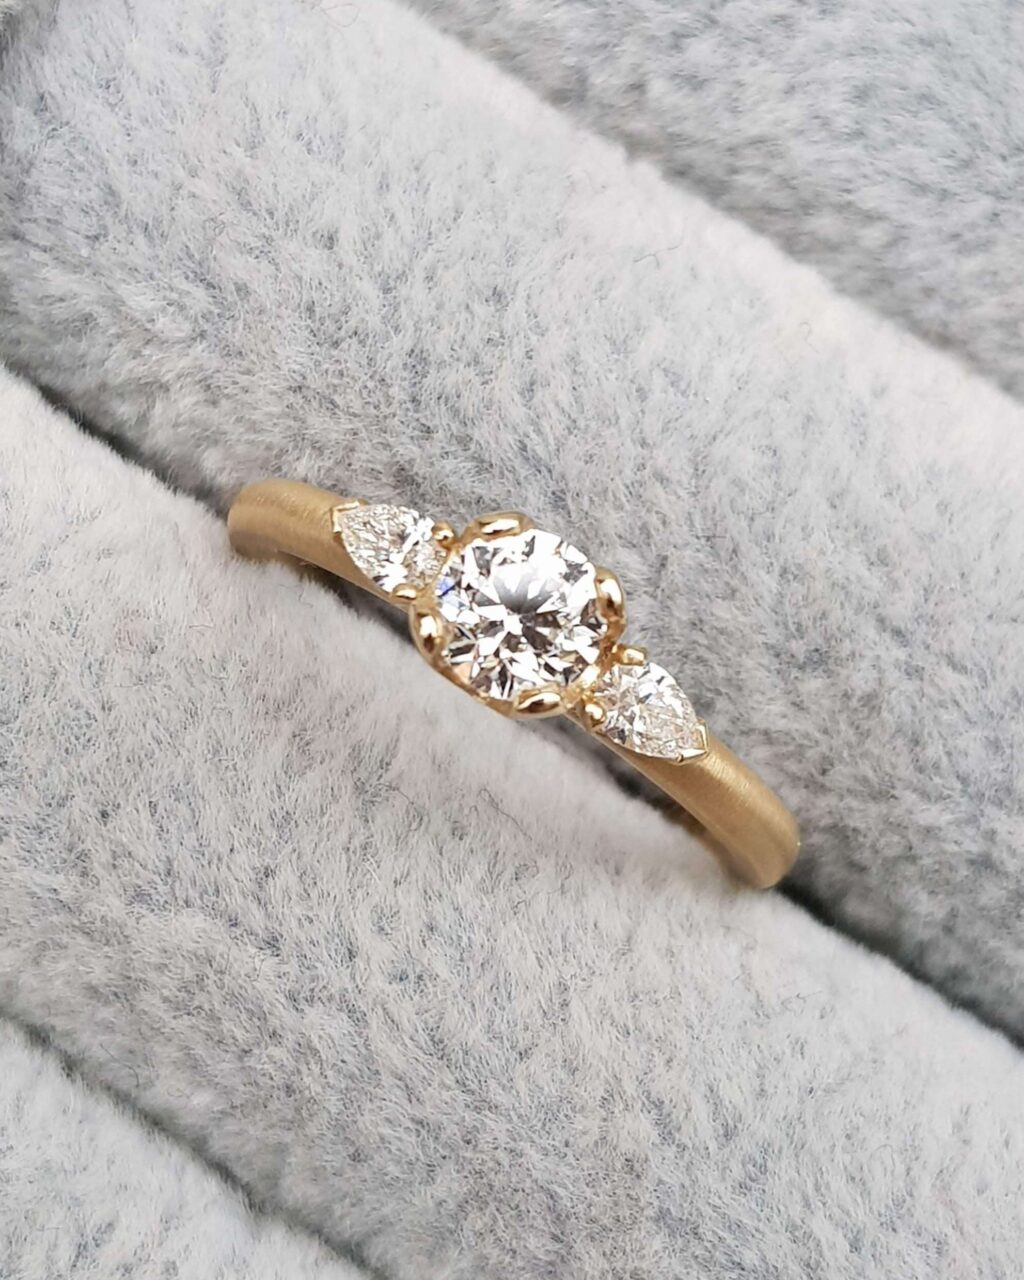 Diamond Trilogy Engagement Ring in yellow gold